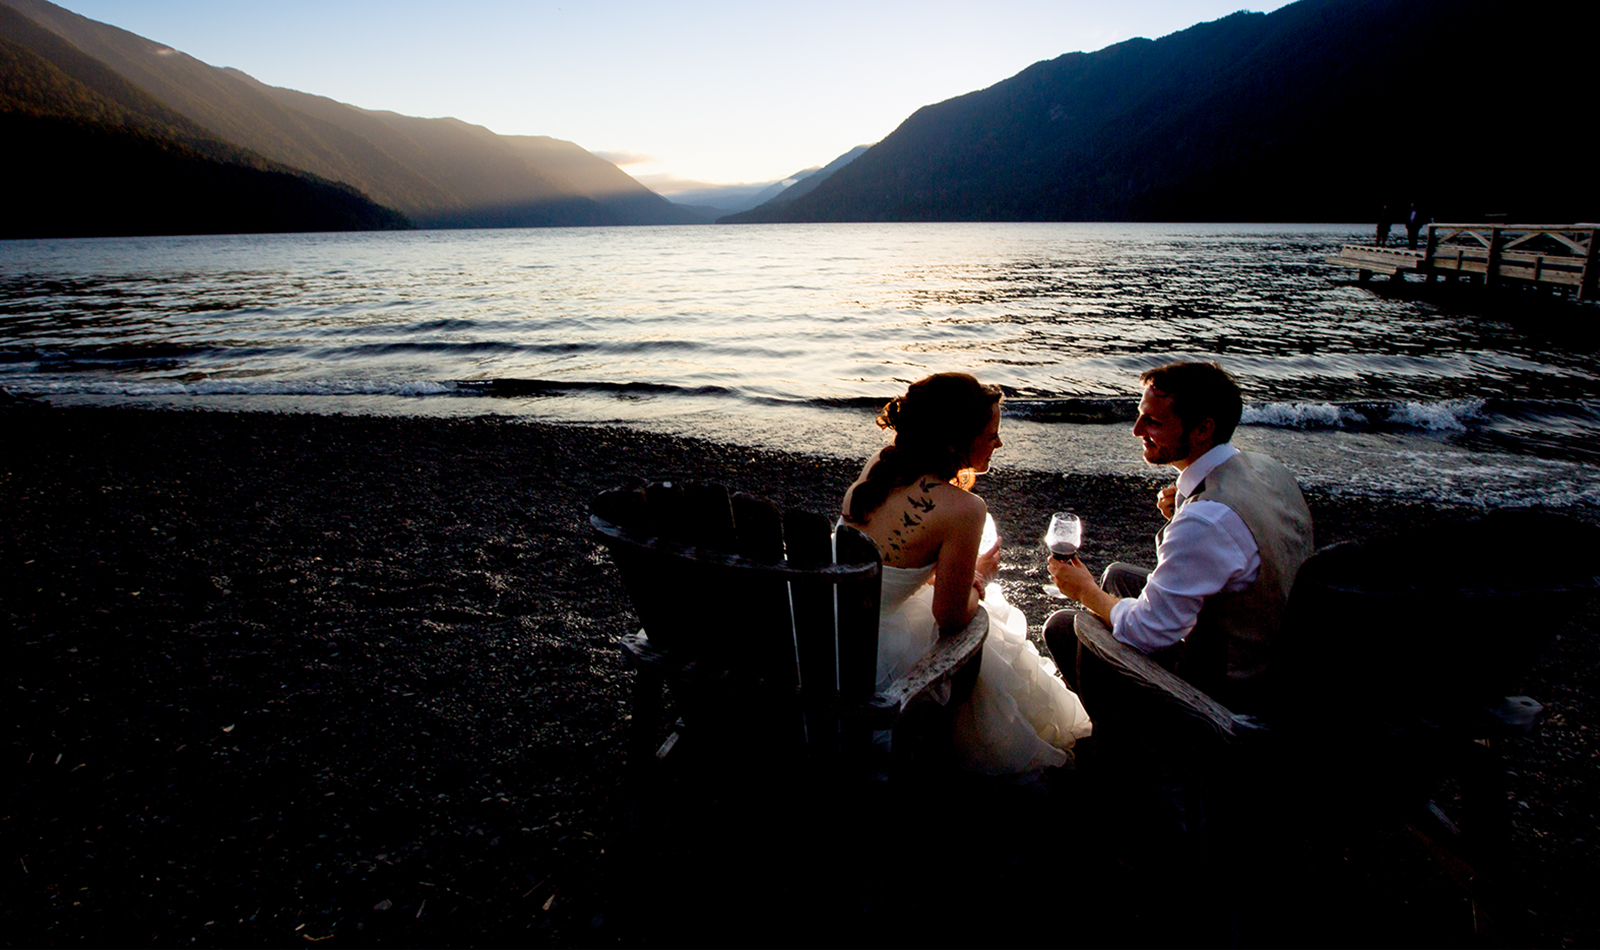 The wedding of Genevieve & Andrew at Lake Crescent Lodge near Port Angeles, Washington. (Photo by Scott Eklund /Red Box Pictures)